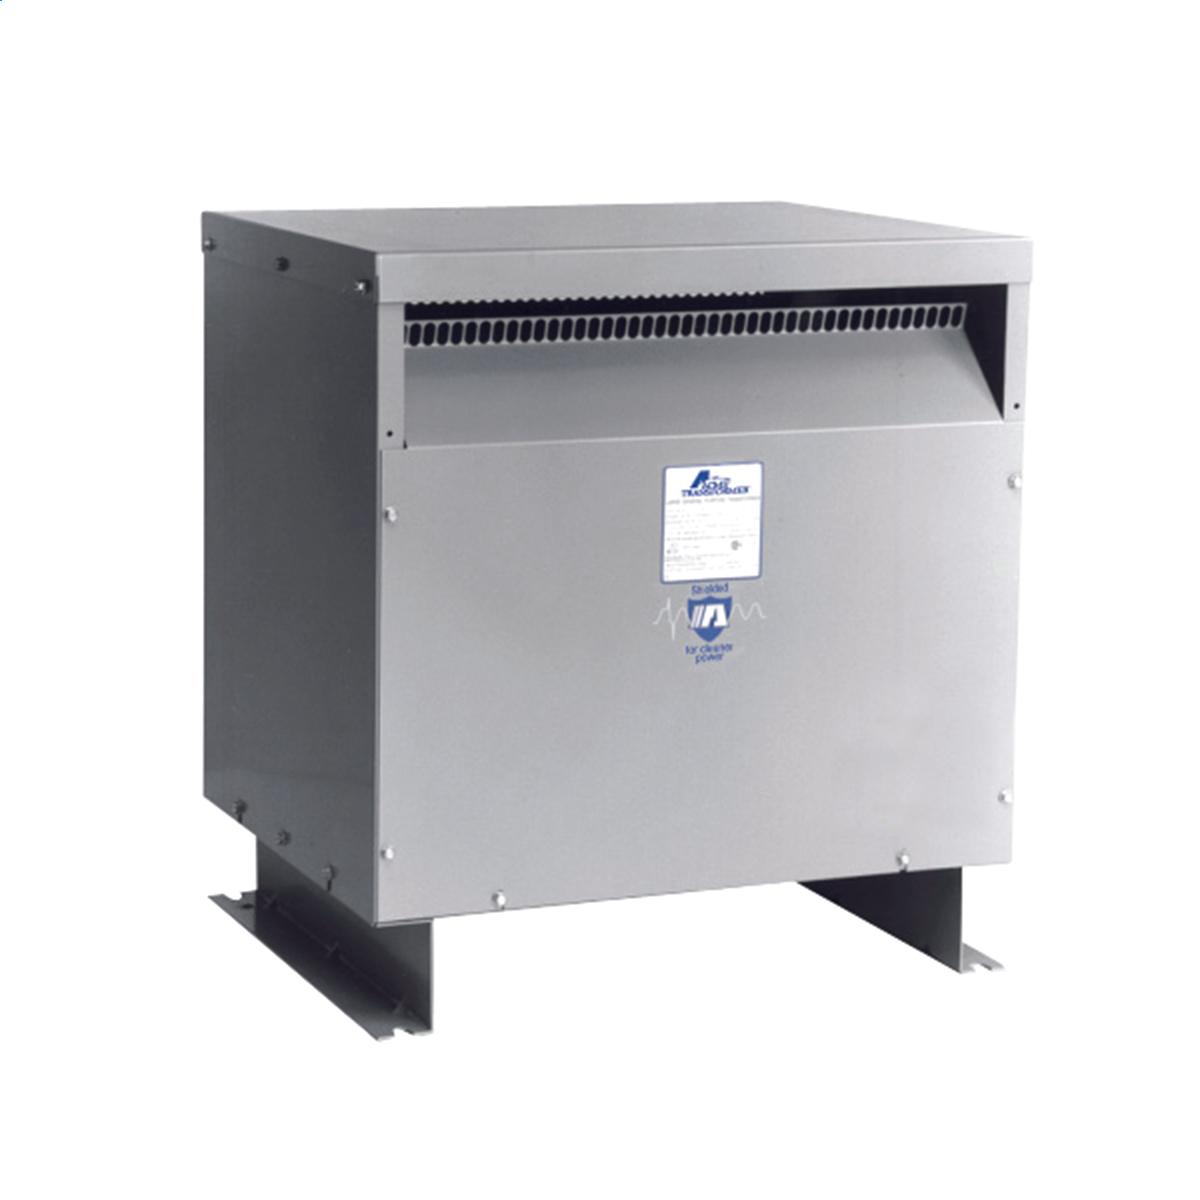 Hubbell WB015K04 Medium Voltage Transformer - Single Phase, 4160 - 120/240V, 15kVA  ; Lower operating cost over Liquid-filled ; No additional fireproofing or venting ; Long life expectancy ; Smaller, lighter easy to maintain